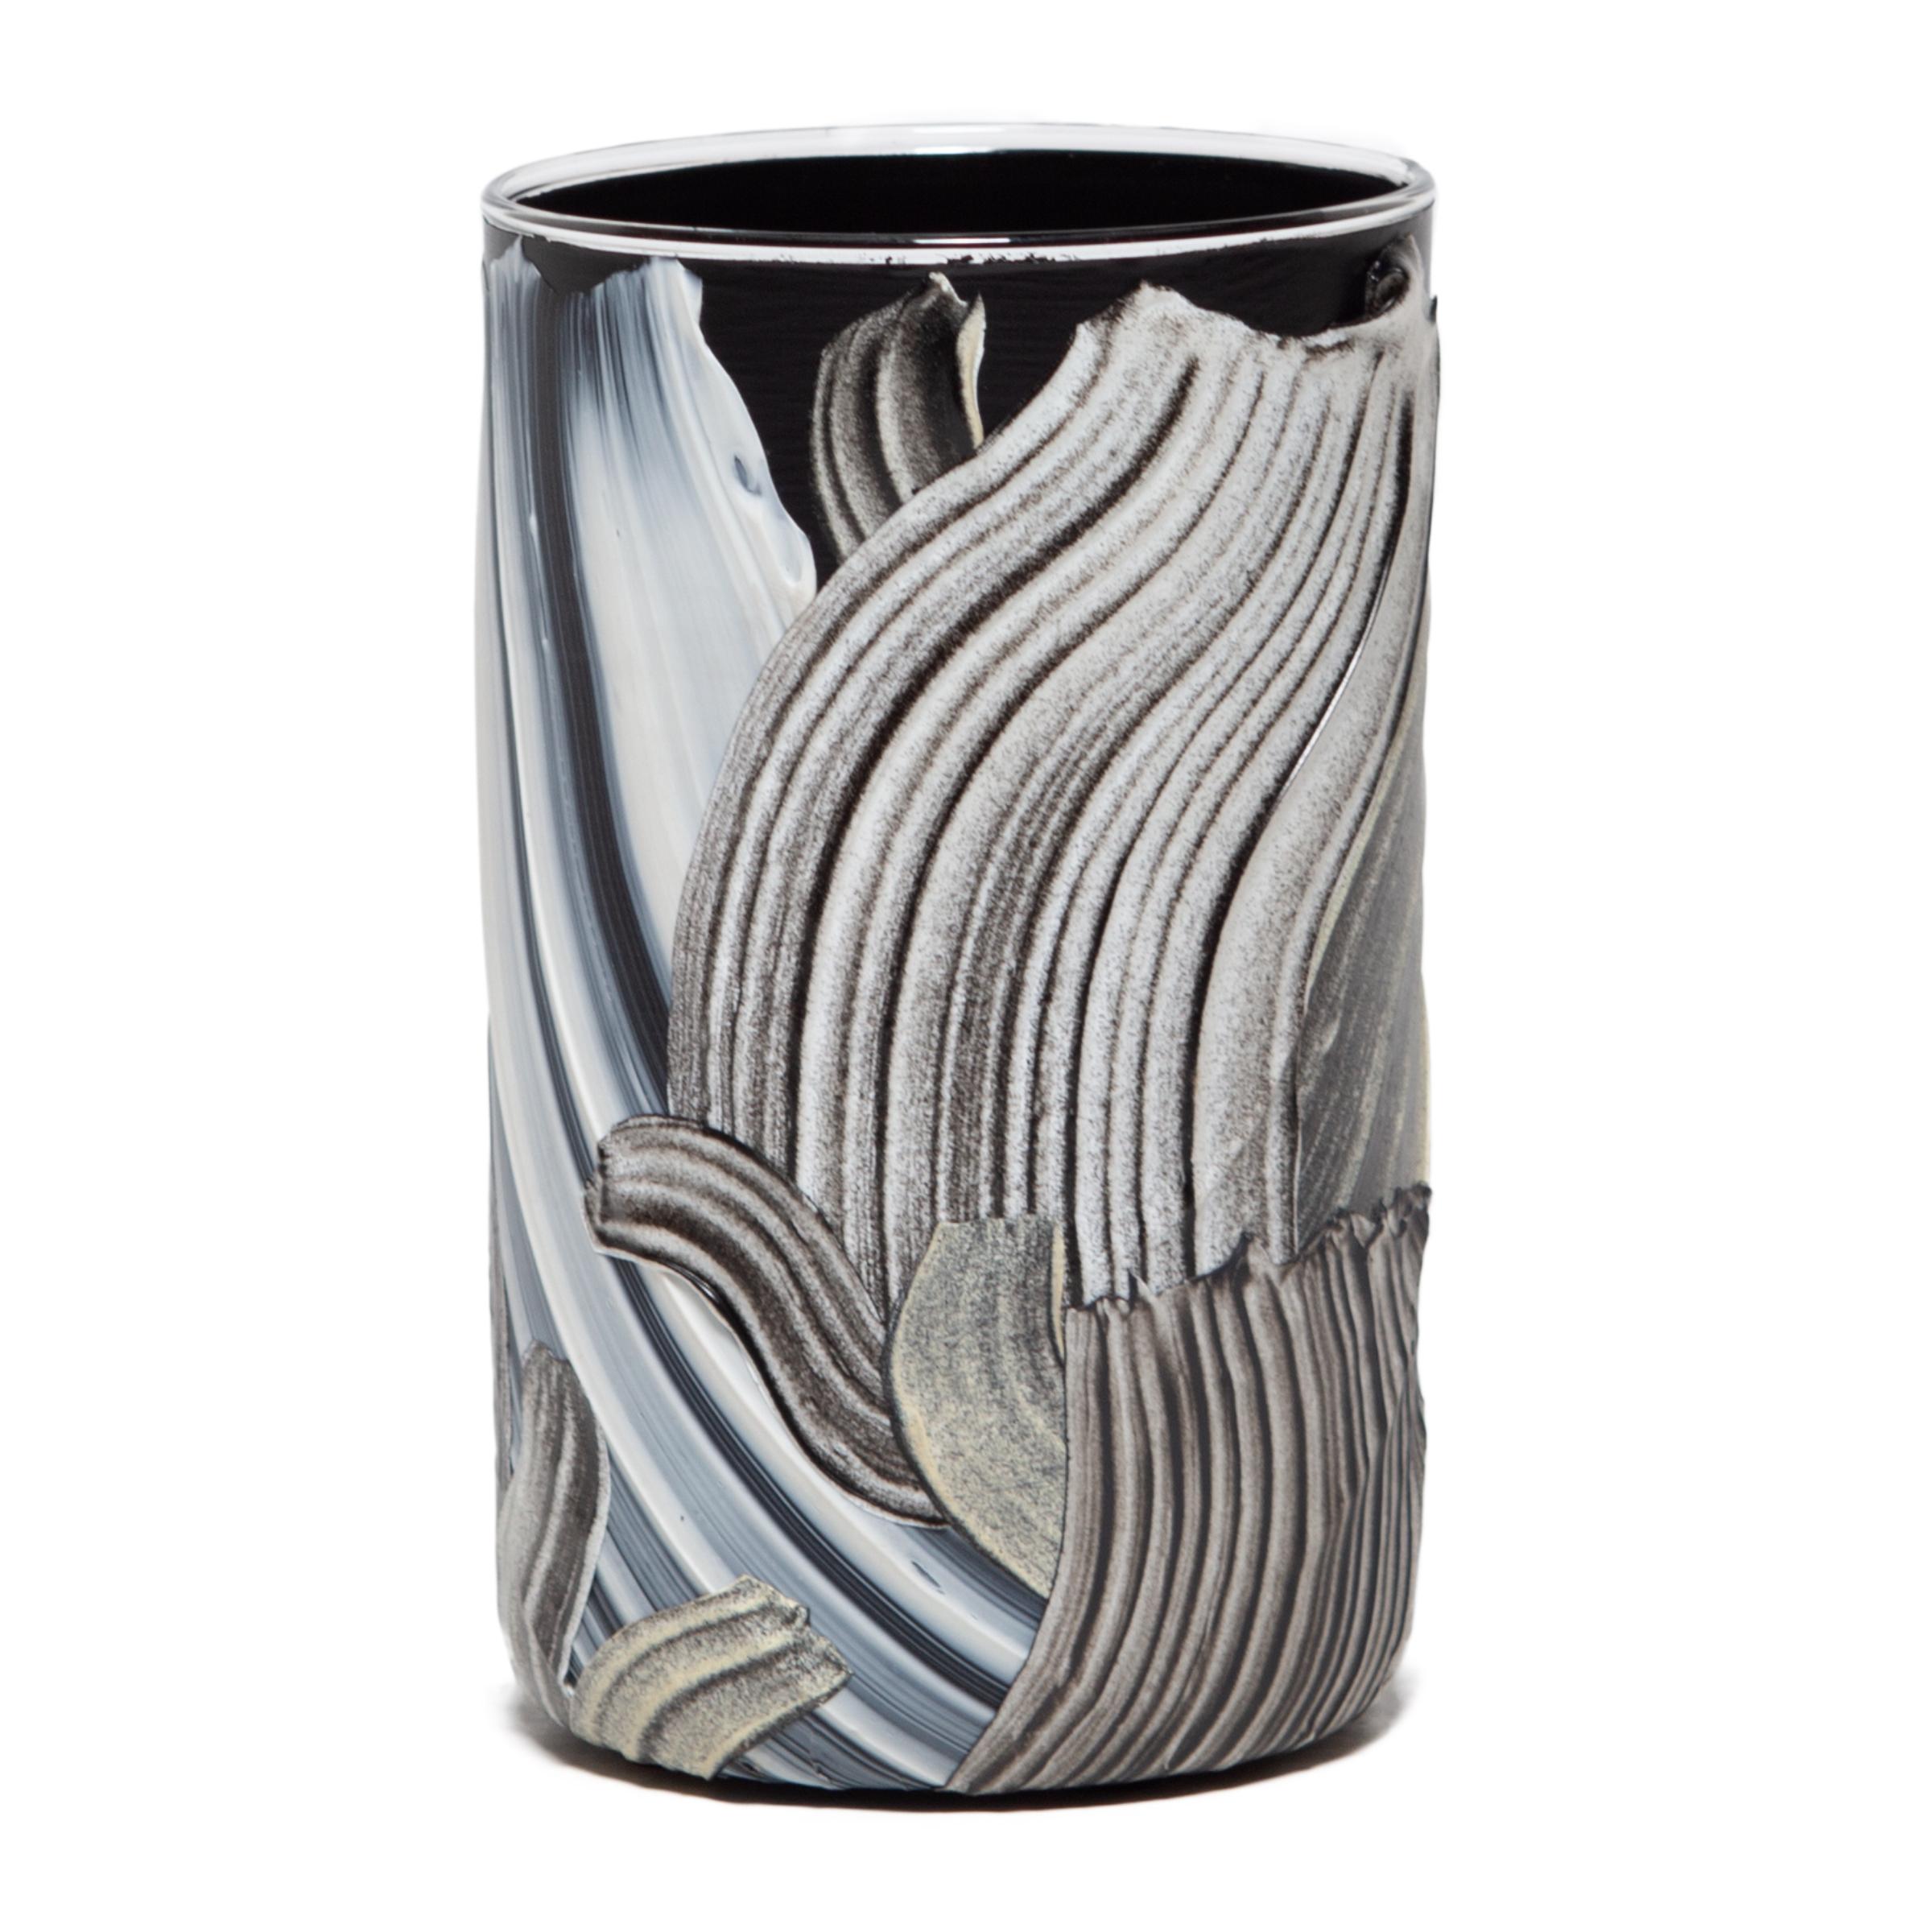 Each captivating portal vase by artist Viktor van Bramer began its life as a painting on canvas. Embracing the meditative tedium of painting, van Bramer allows the intricacies of each brushstroke to guide his final design. The artist first